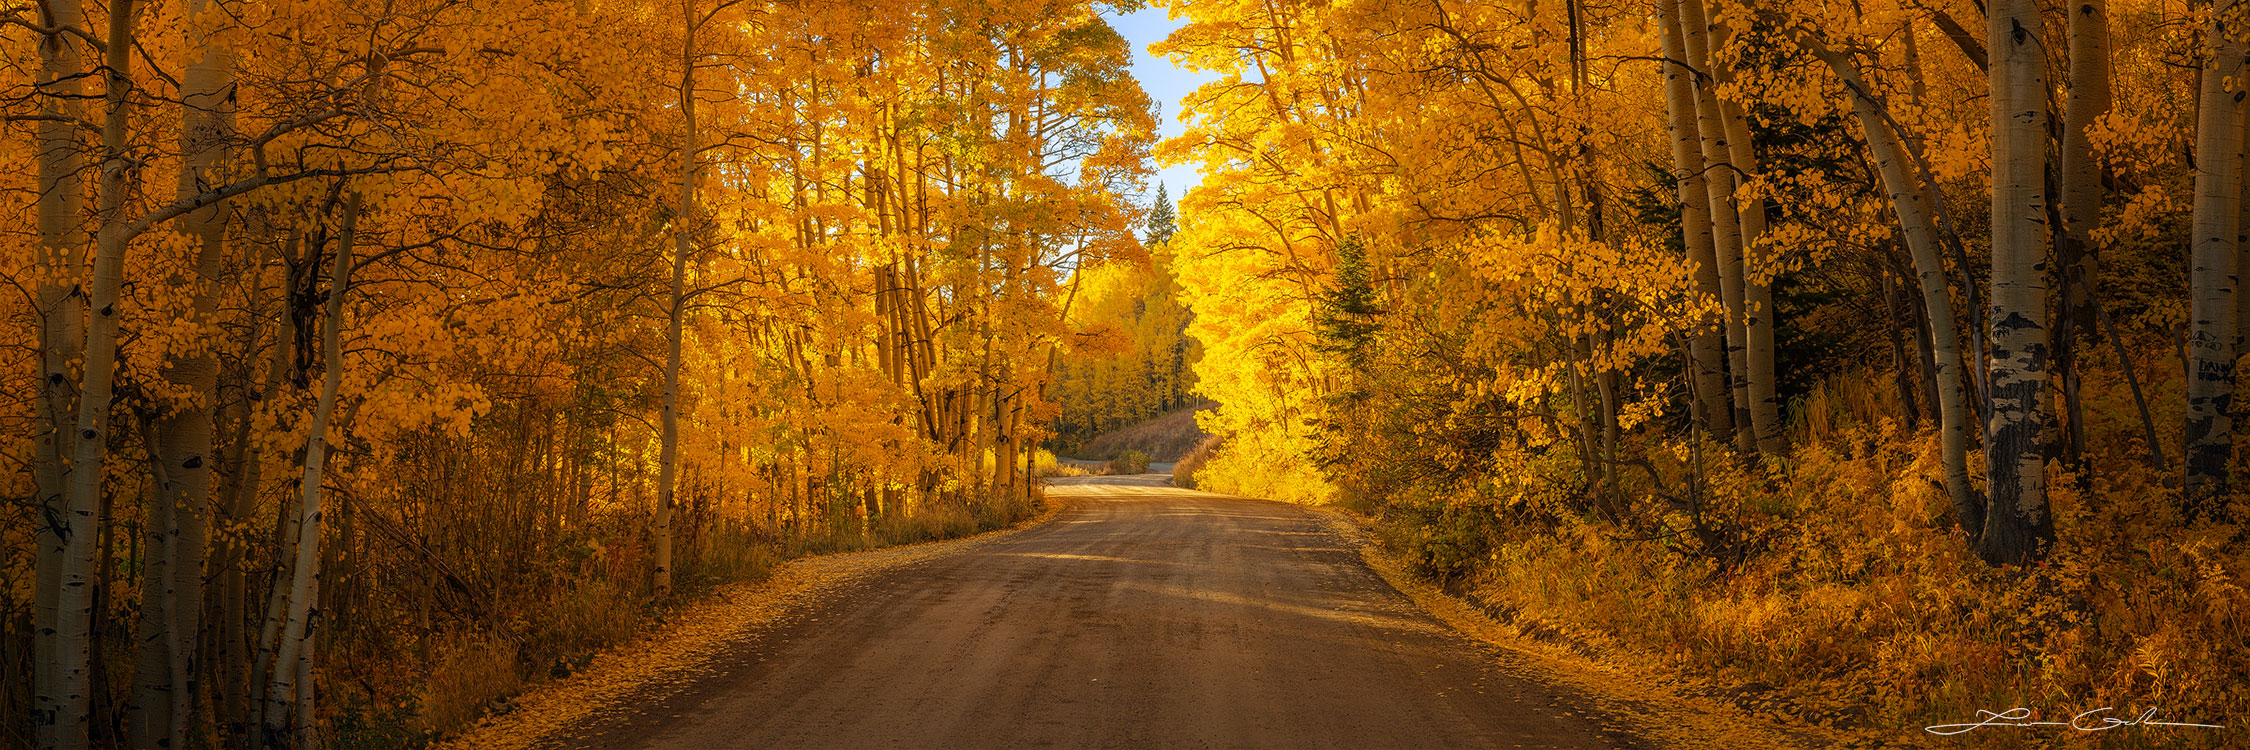 Forest road fall colors in Aspen forest near Crested Butte, Colorado mountains - Morning Majesty fine art image capturing golden aspen leaves in full autumn splendor. - Gintchin Fine Art